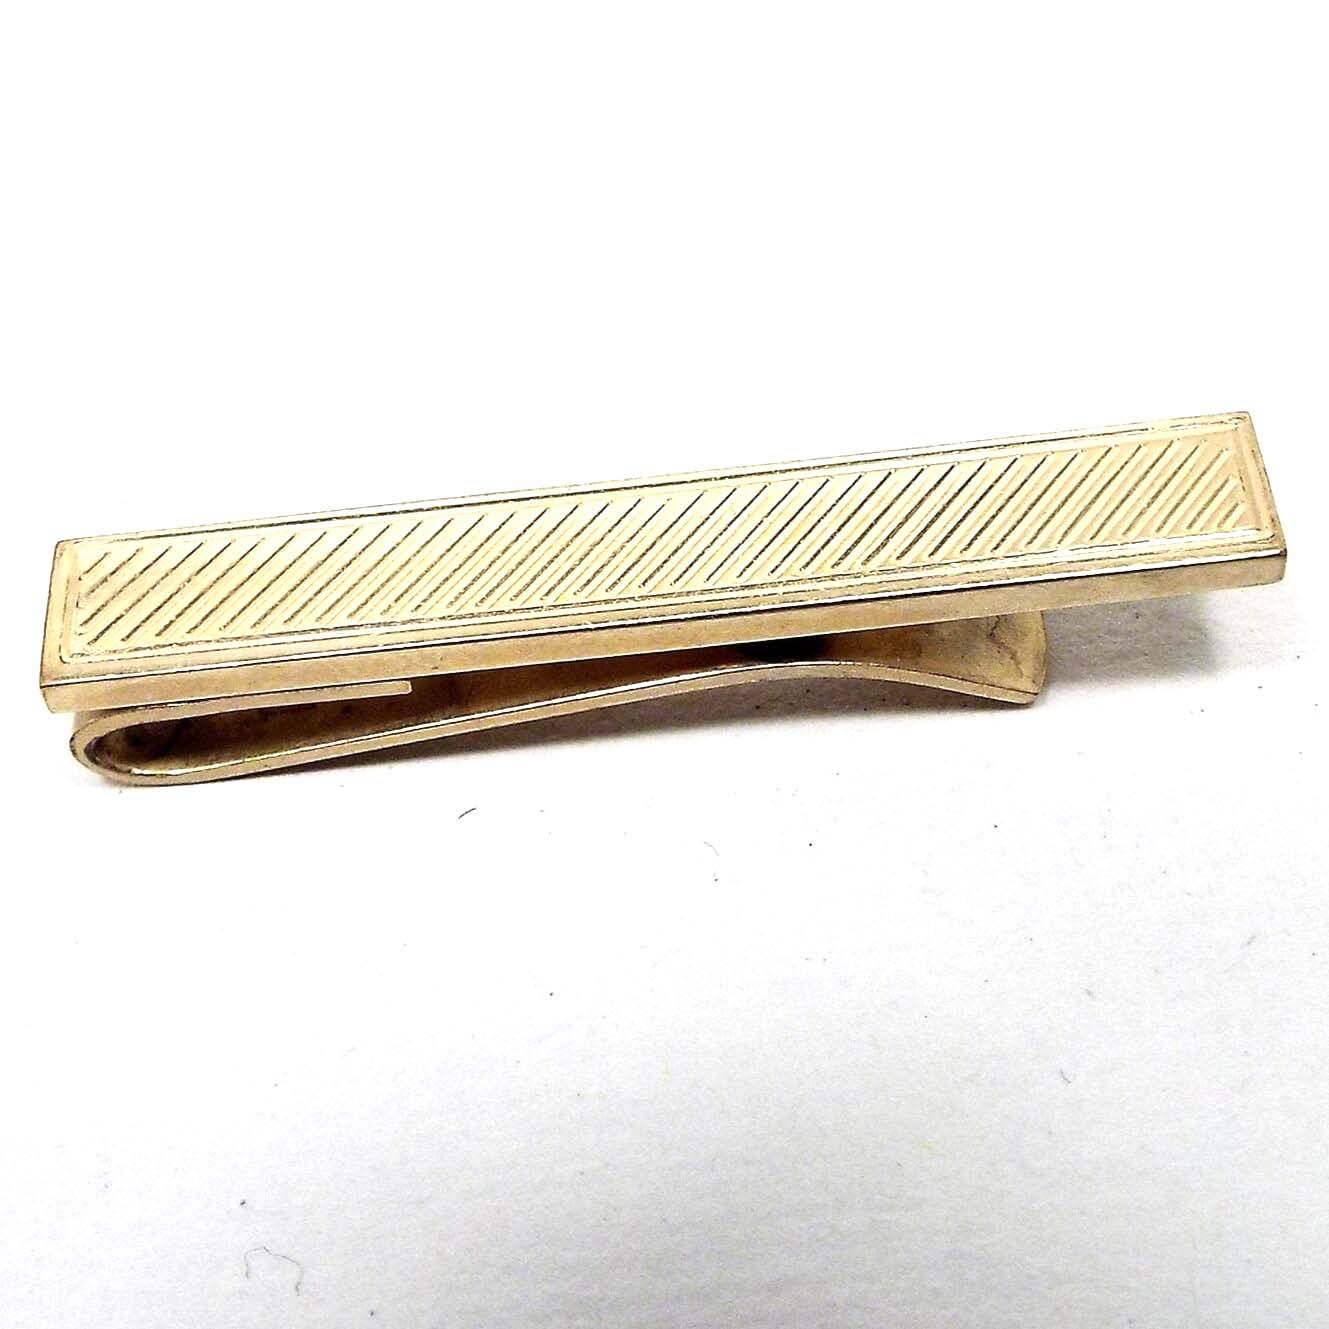 Front view of the Mid Century vintage Dante gold filled tie bar. The metal is gold in color and rectangular shaped. There is an etched diagonal line design down the tie bar.